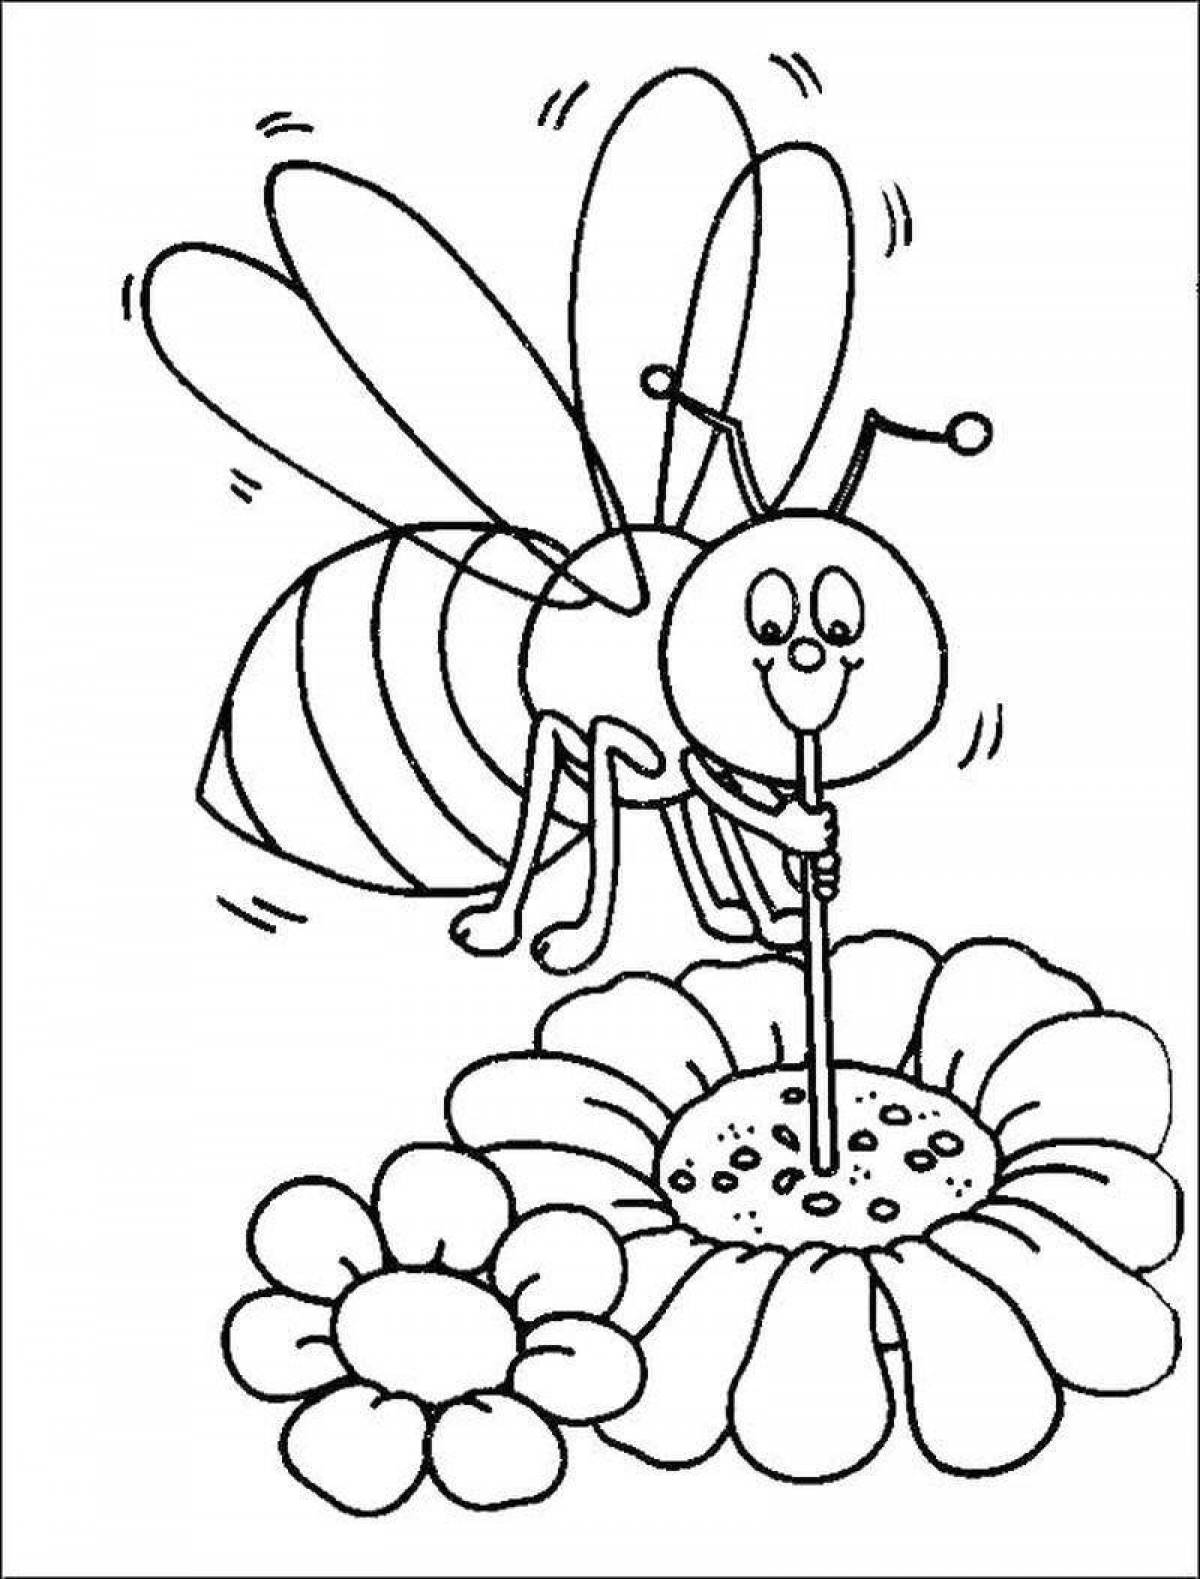 Cute bee coloring book for 6-7 year olds